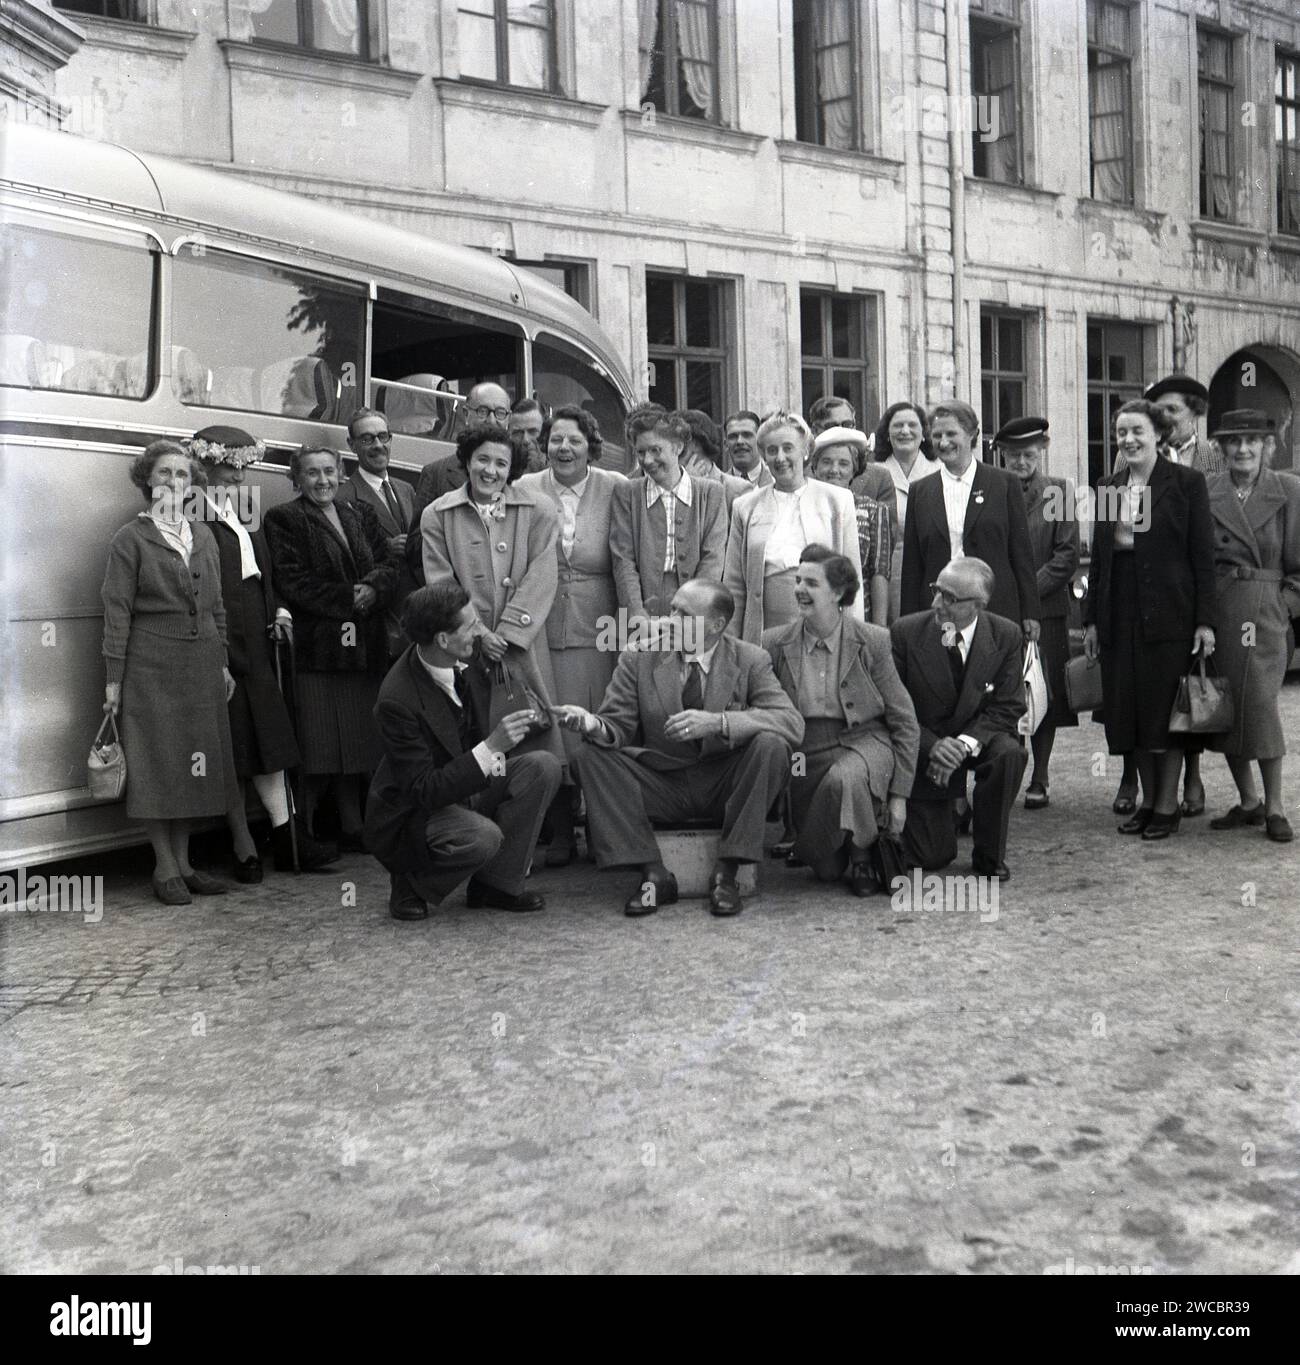 1950, historical, in a cobbled Frrench courtyard, a group of adults gathered outside for photo by their coach of their era, a Dennis. The men and women are on a trip visiting Commonwealth War graves and wearing formal clothes.. lots of laughter. Stock Photo